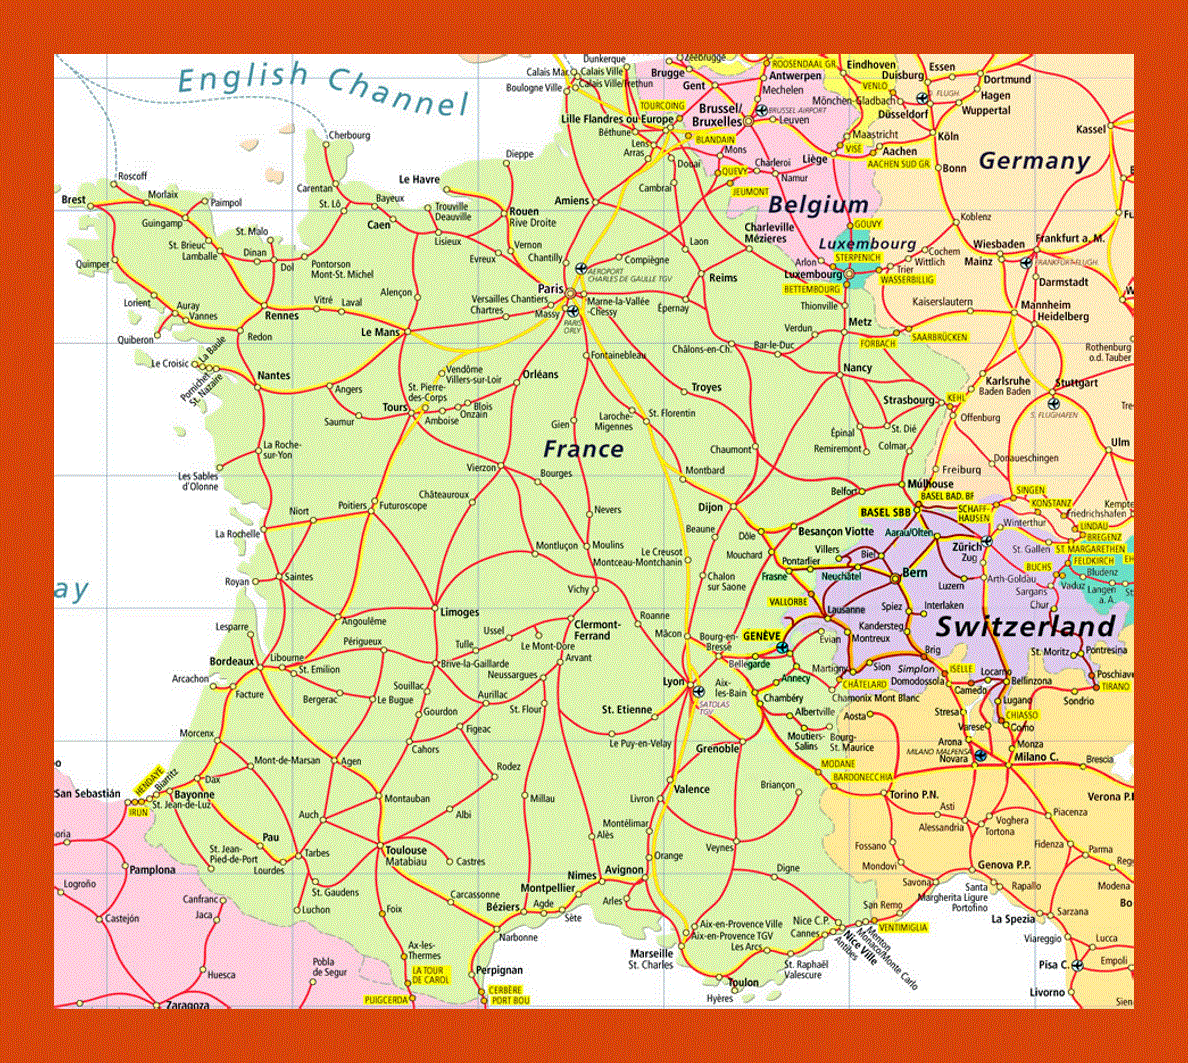 Highways map of France and Switzerland